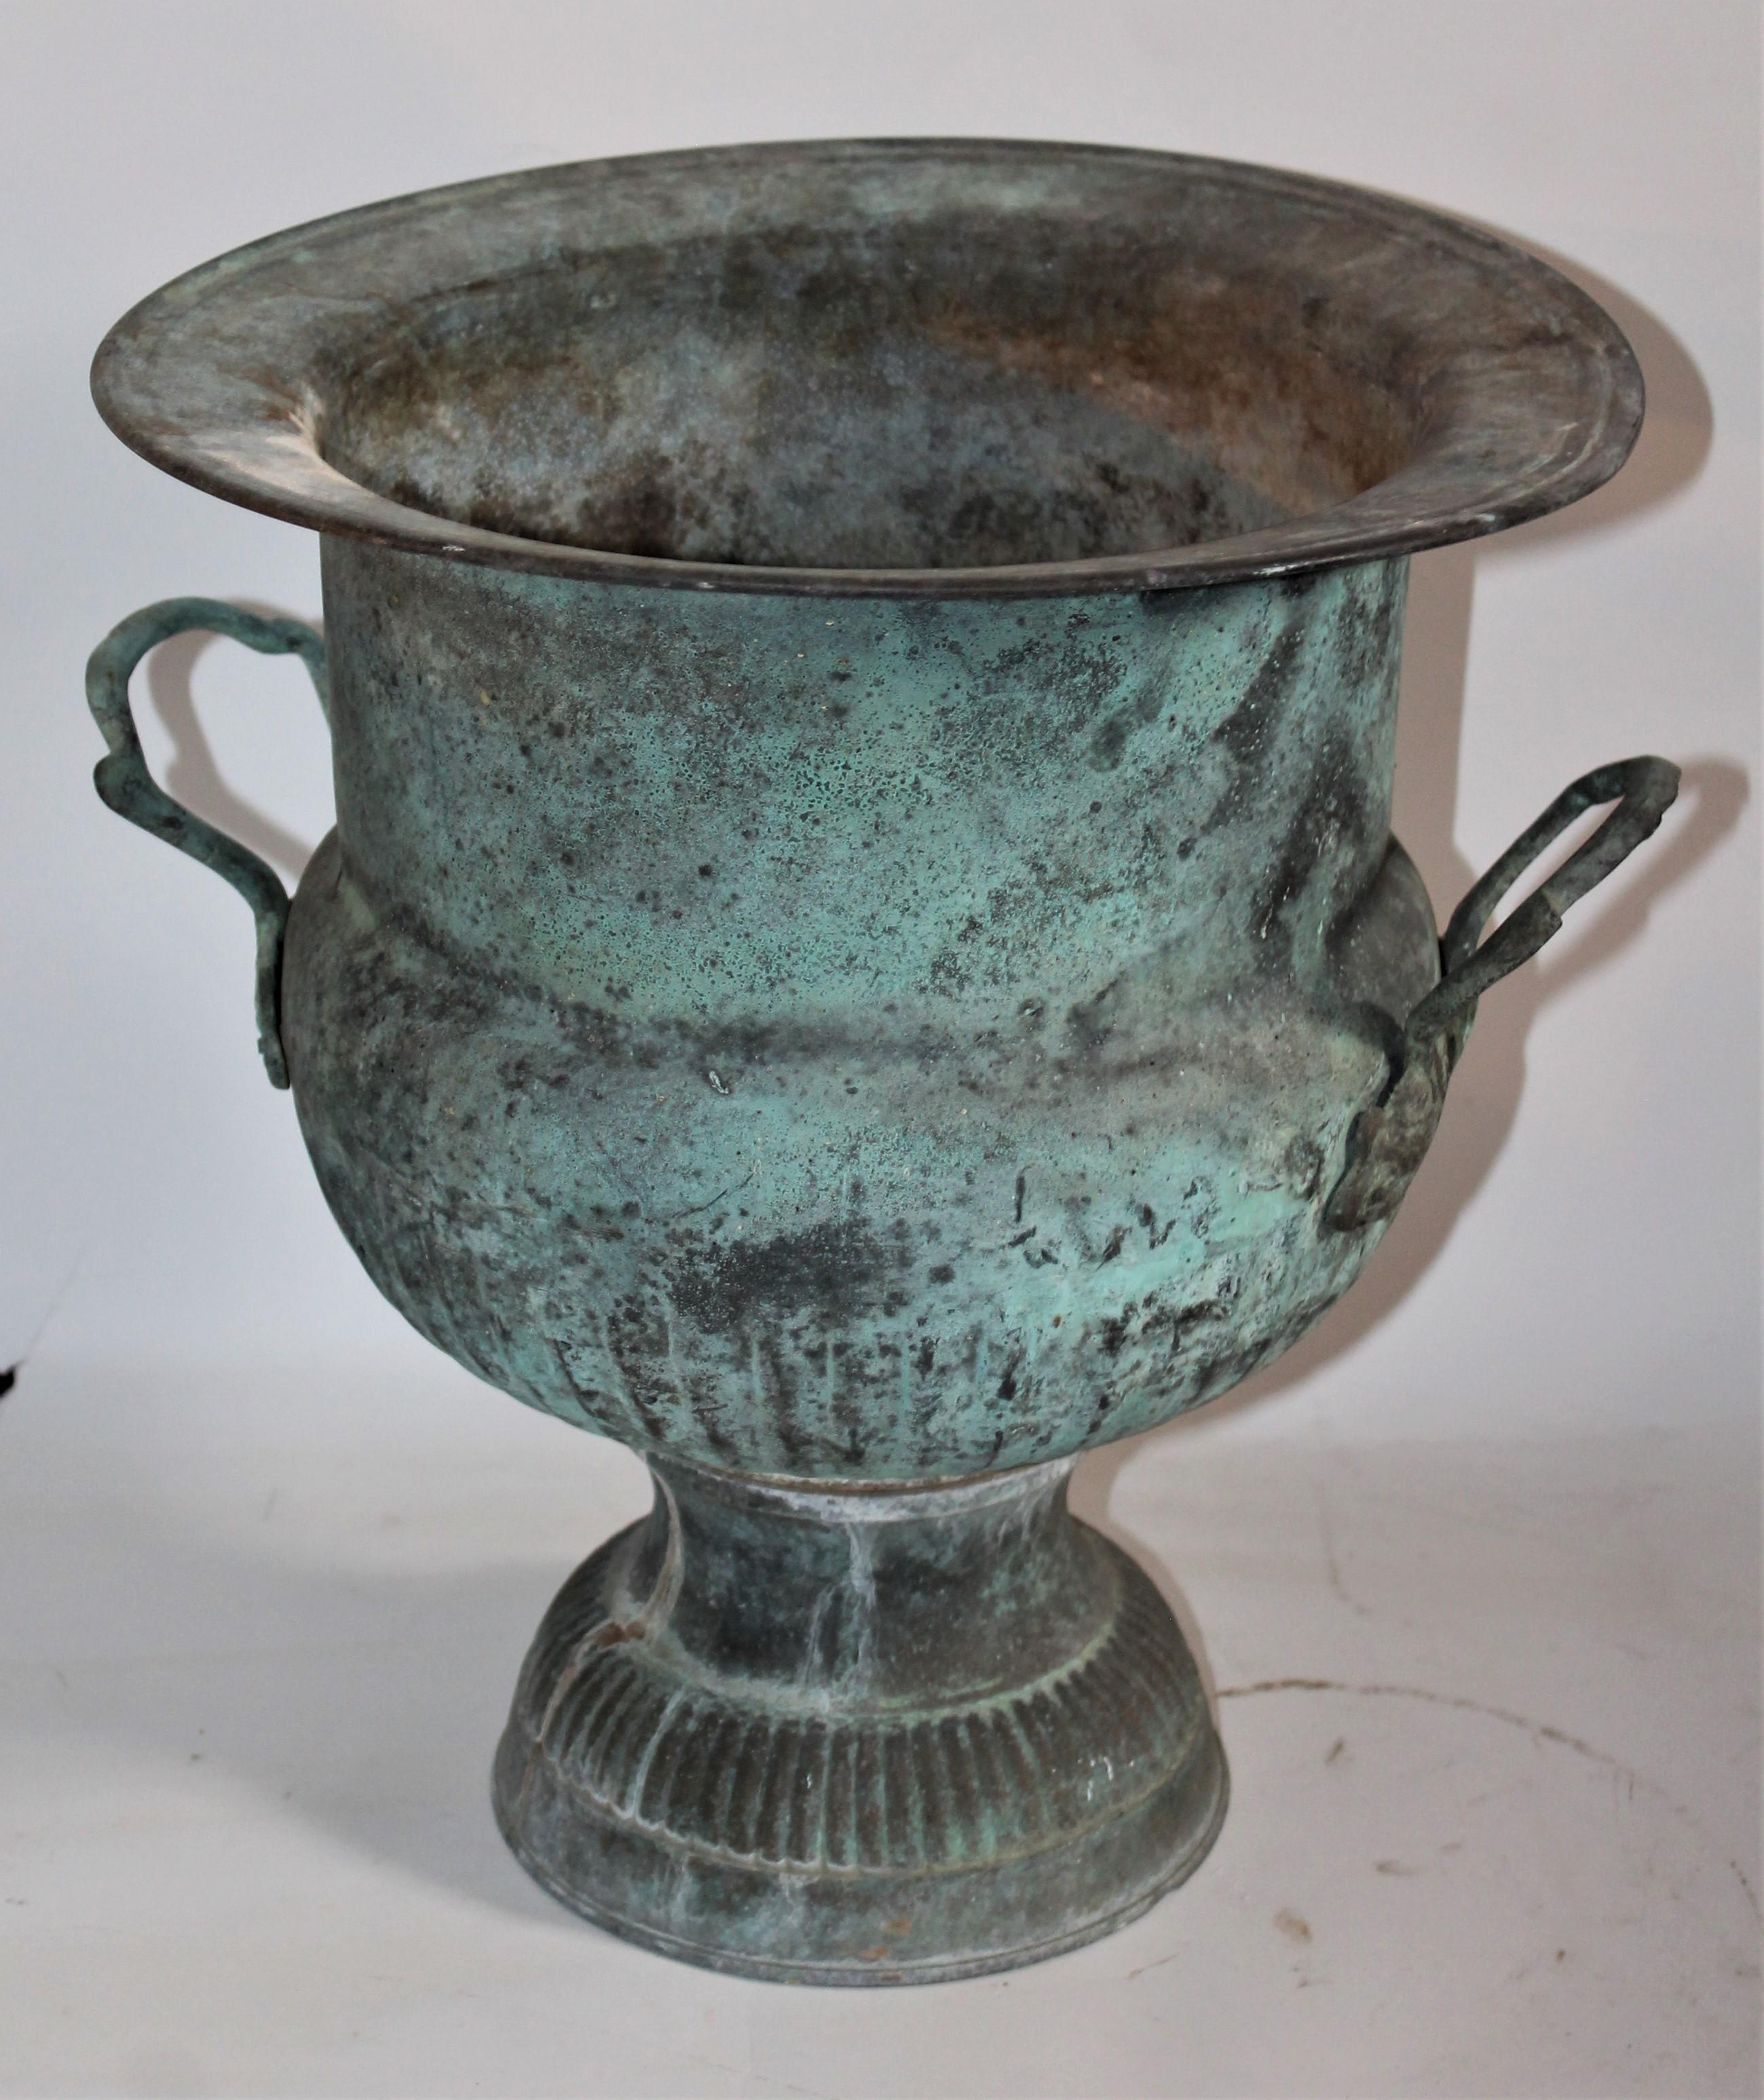 This copper urn has a amazing untouched copper patinated surface and double handles. The condition is very good.